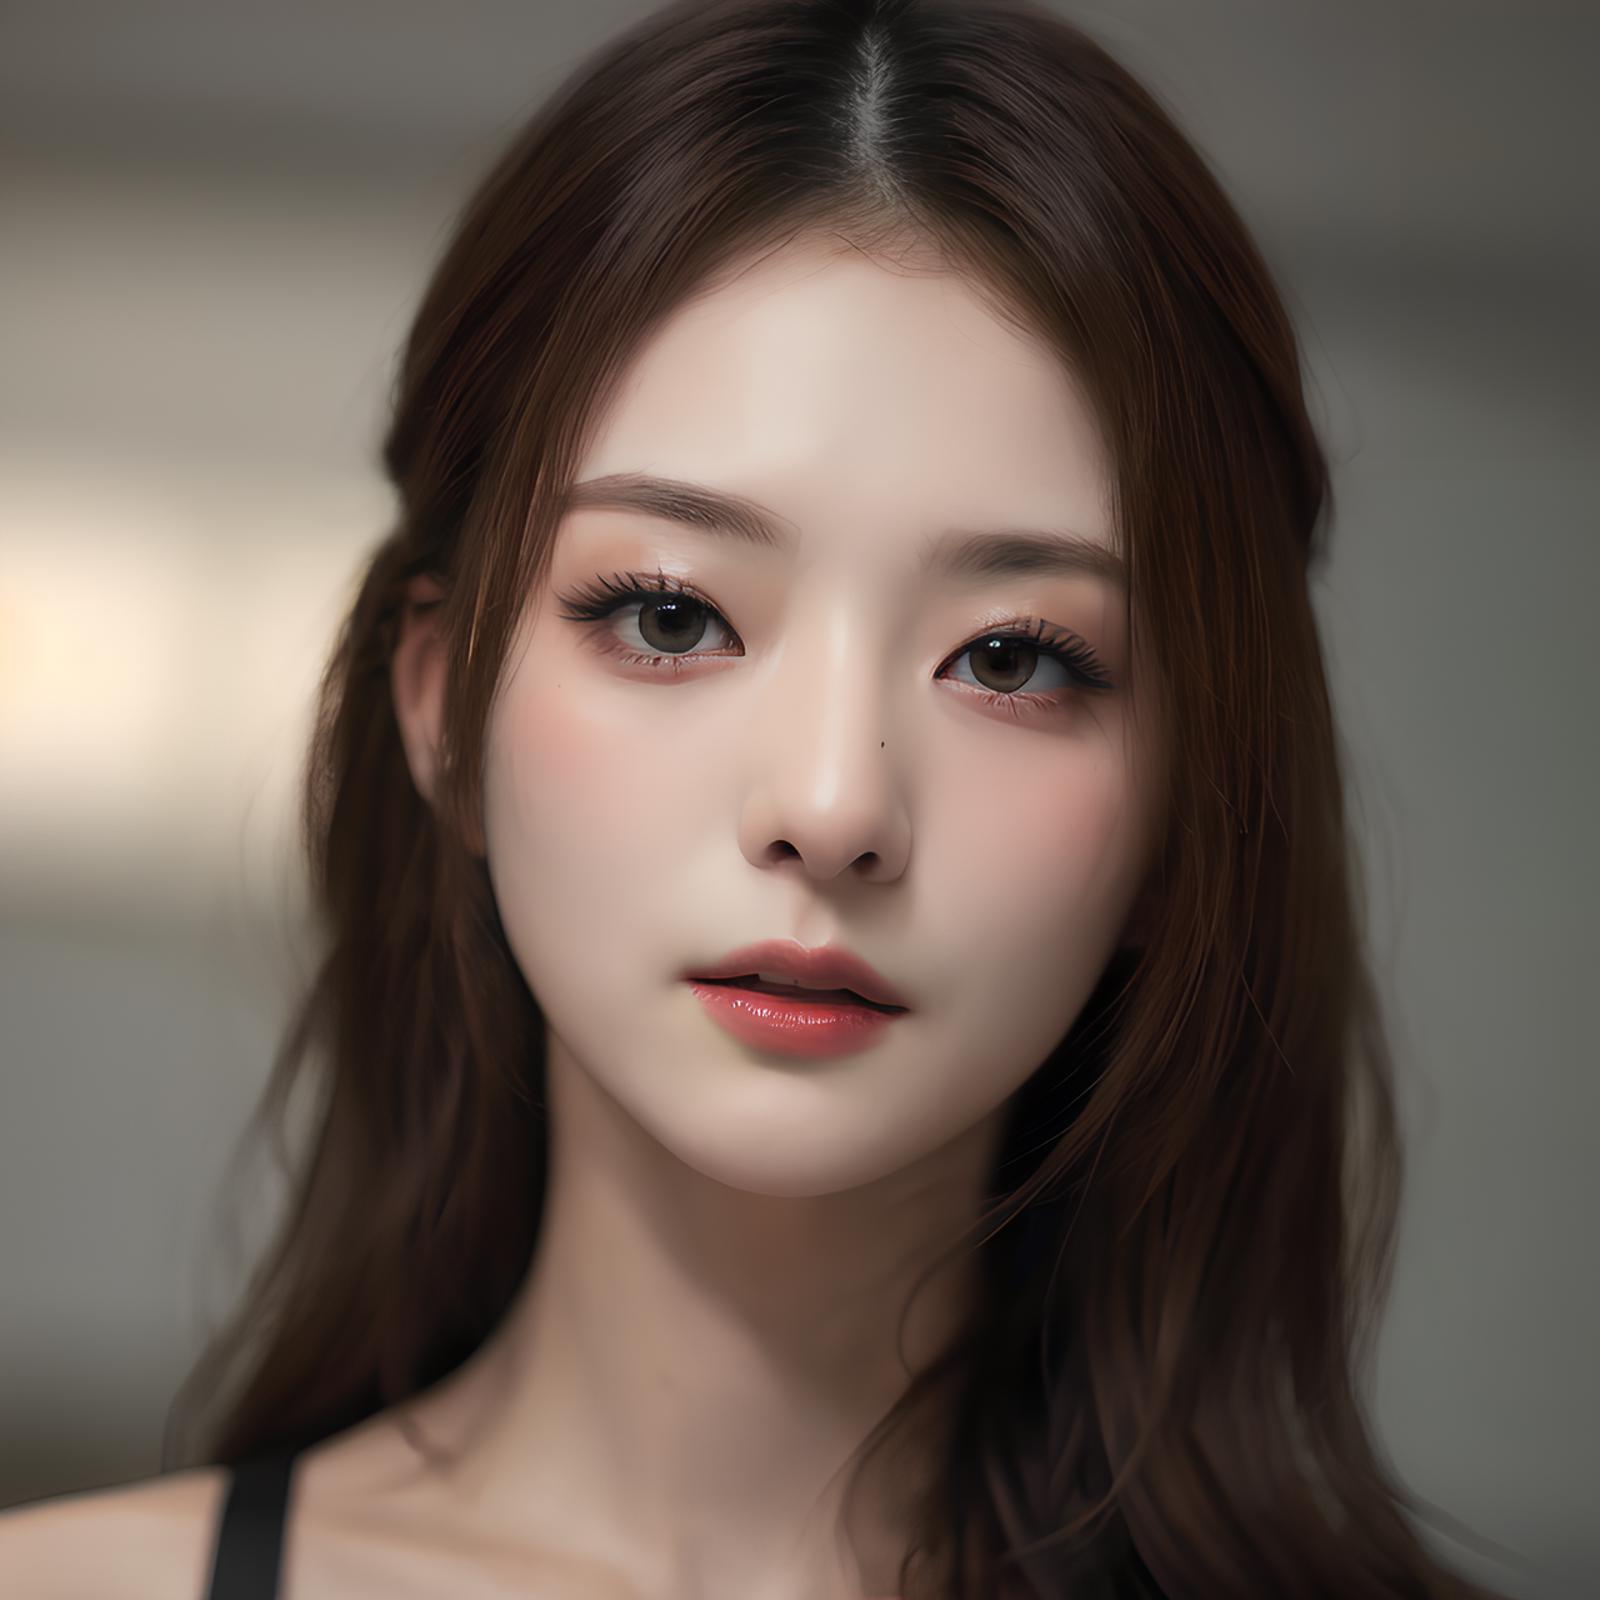 Not Fromis_9 - Nagyung image by Tissue_AI